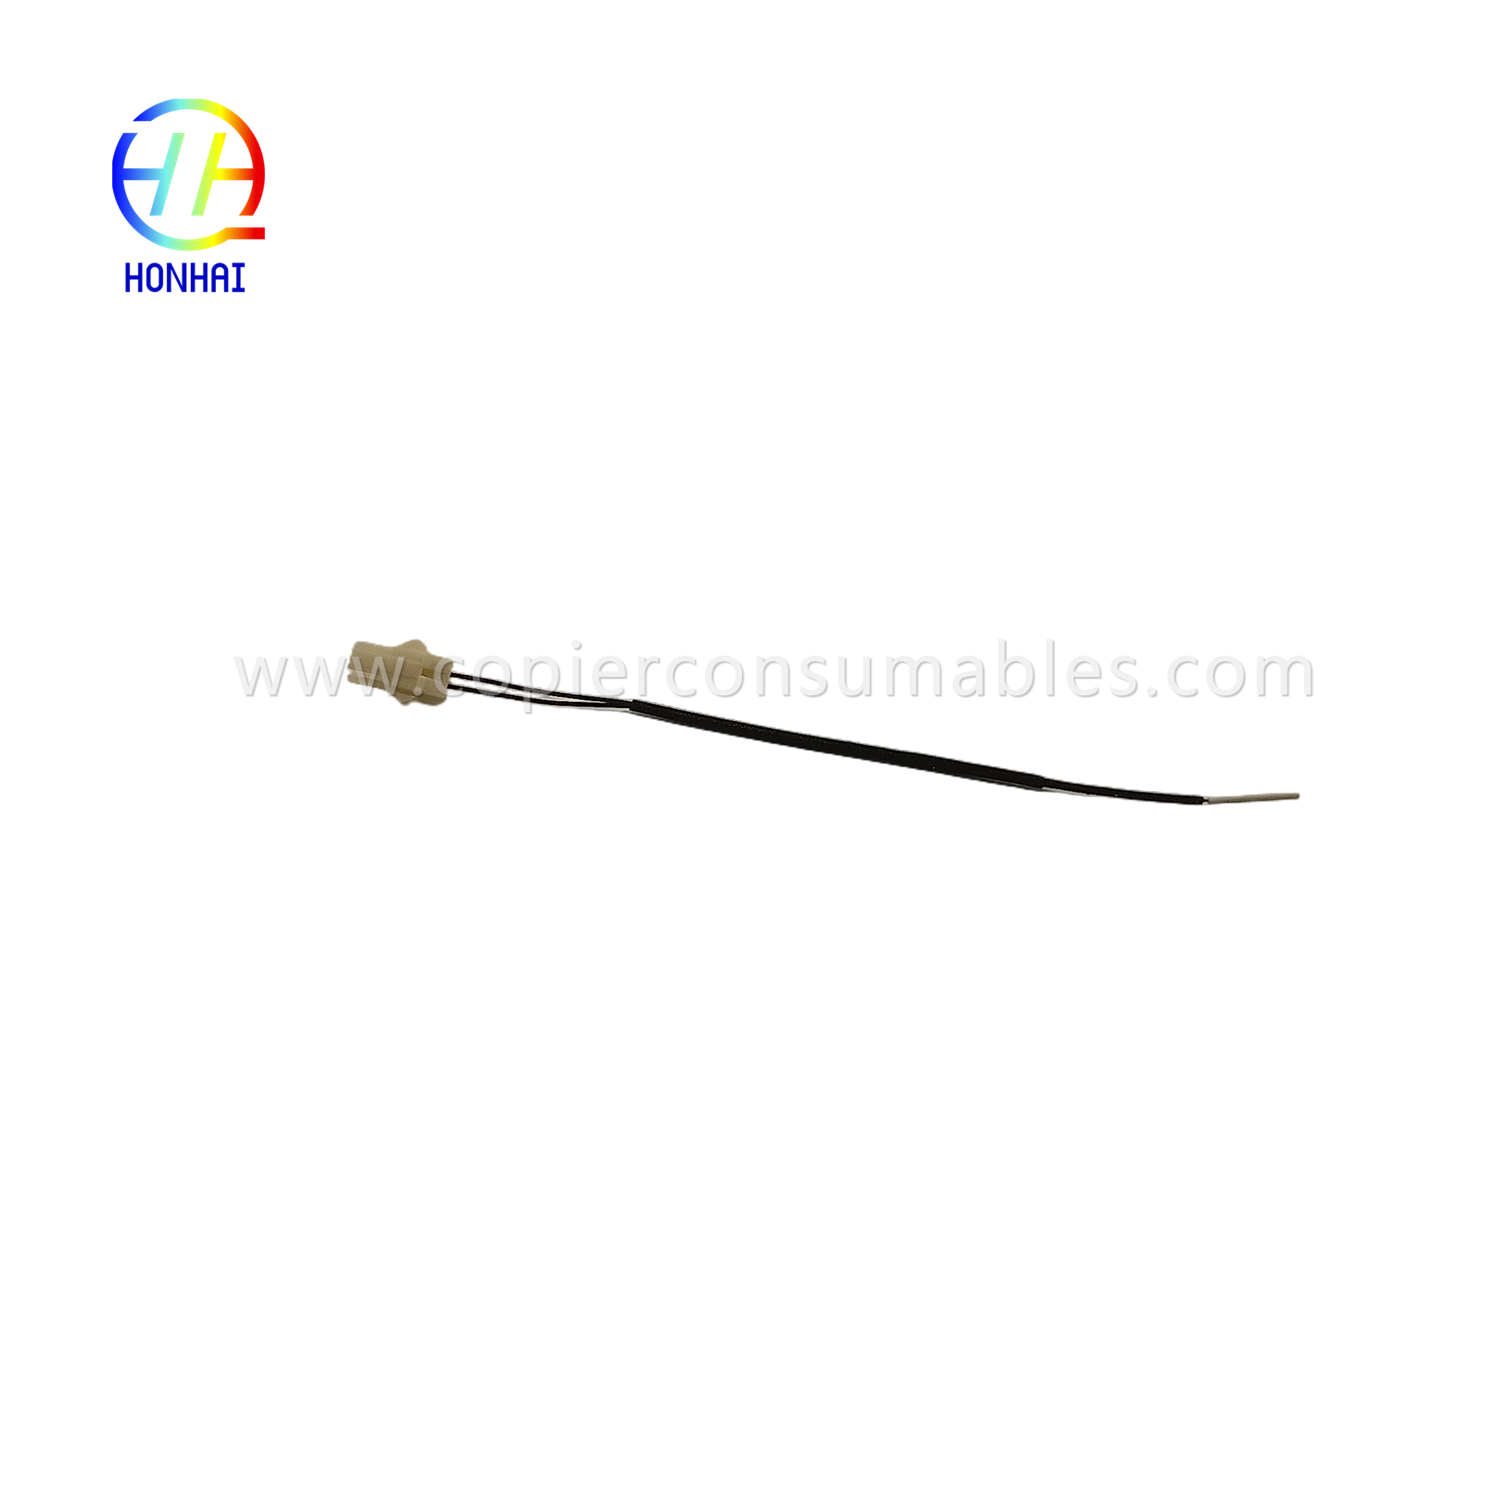 Fuser Thermistor for OCE 9400 TDS300 TDS750PW300350  (1)